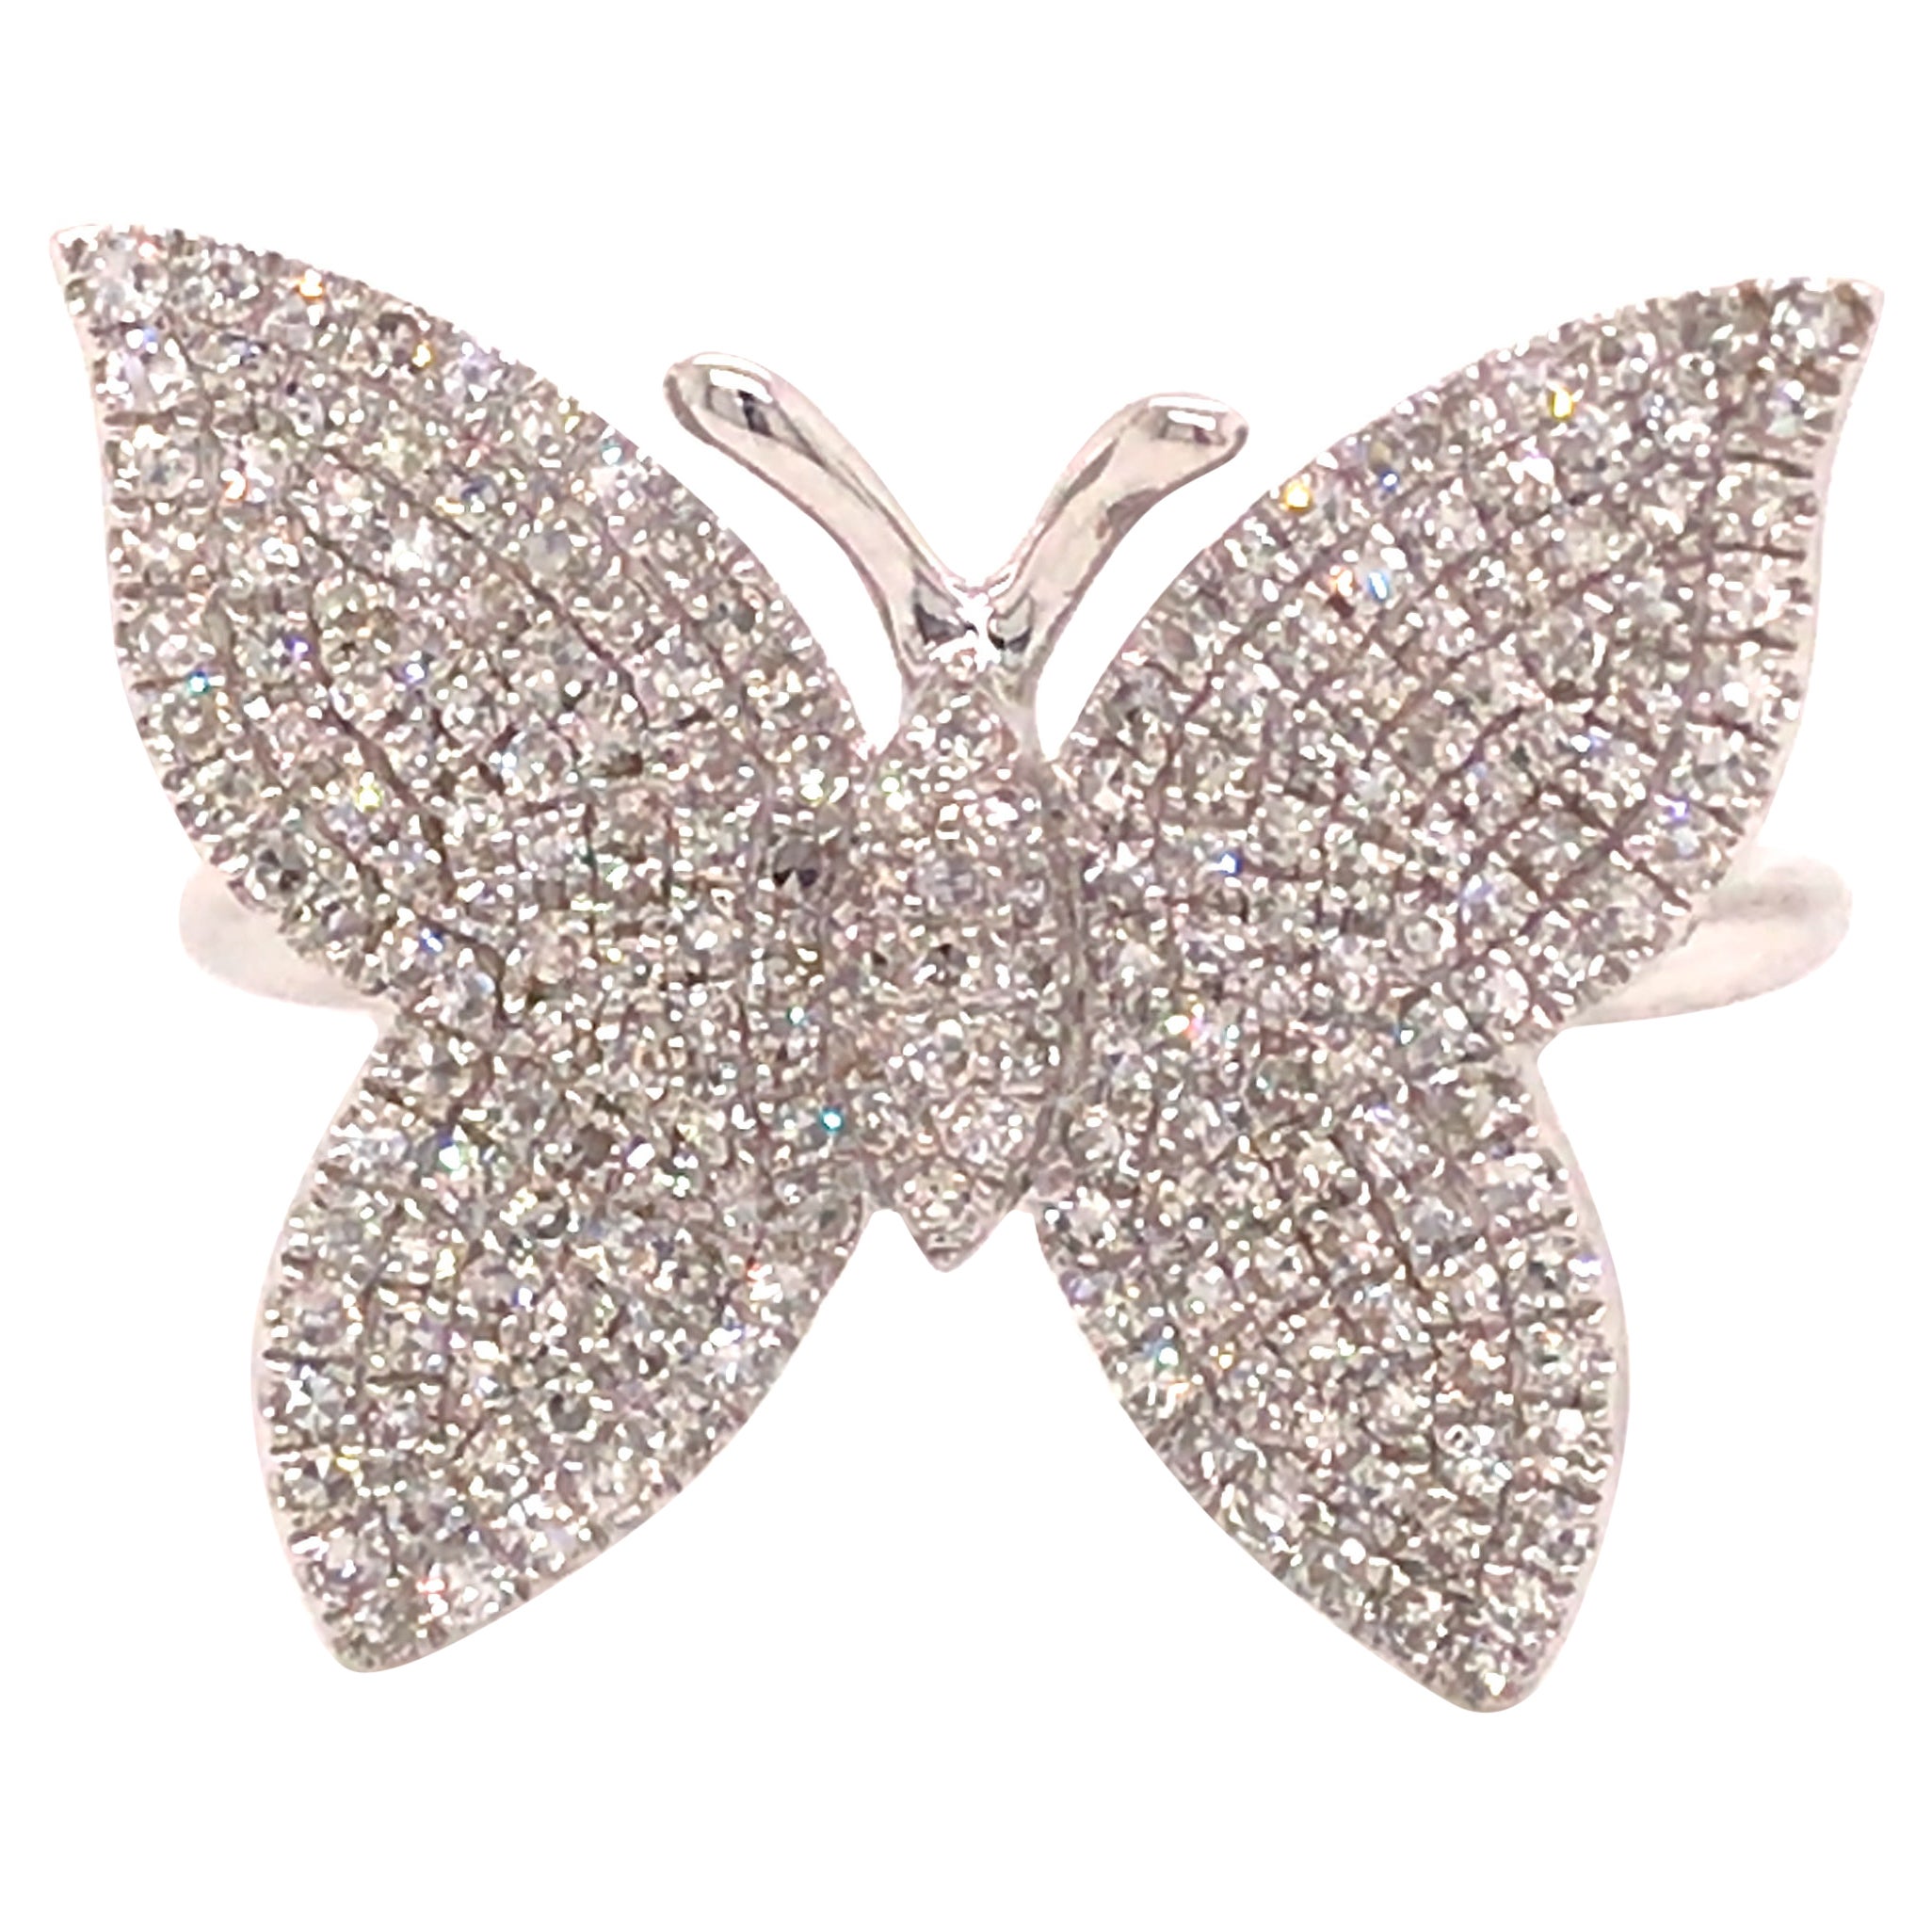 14K Pave Diamond Butterfly Ring White Gold